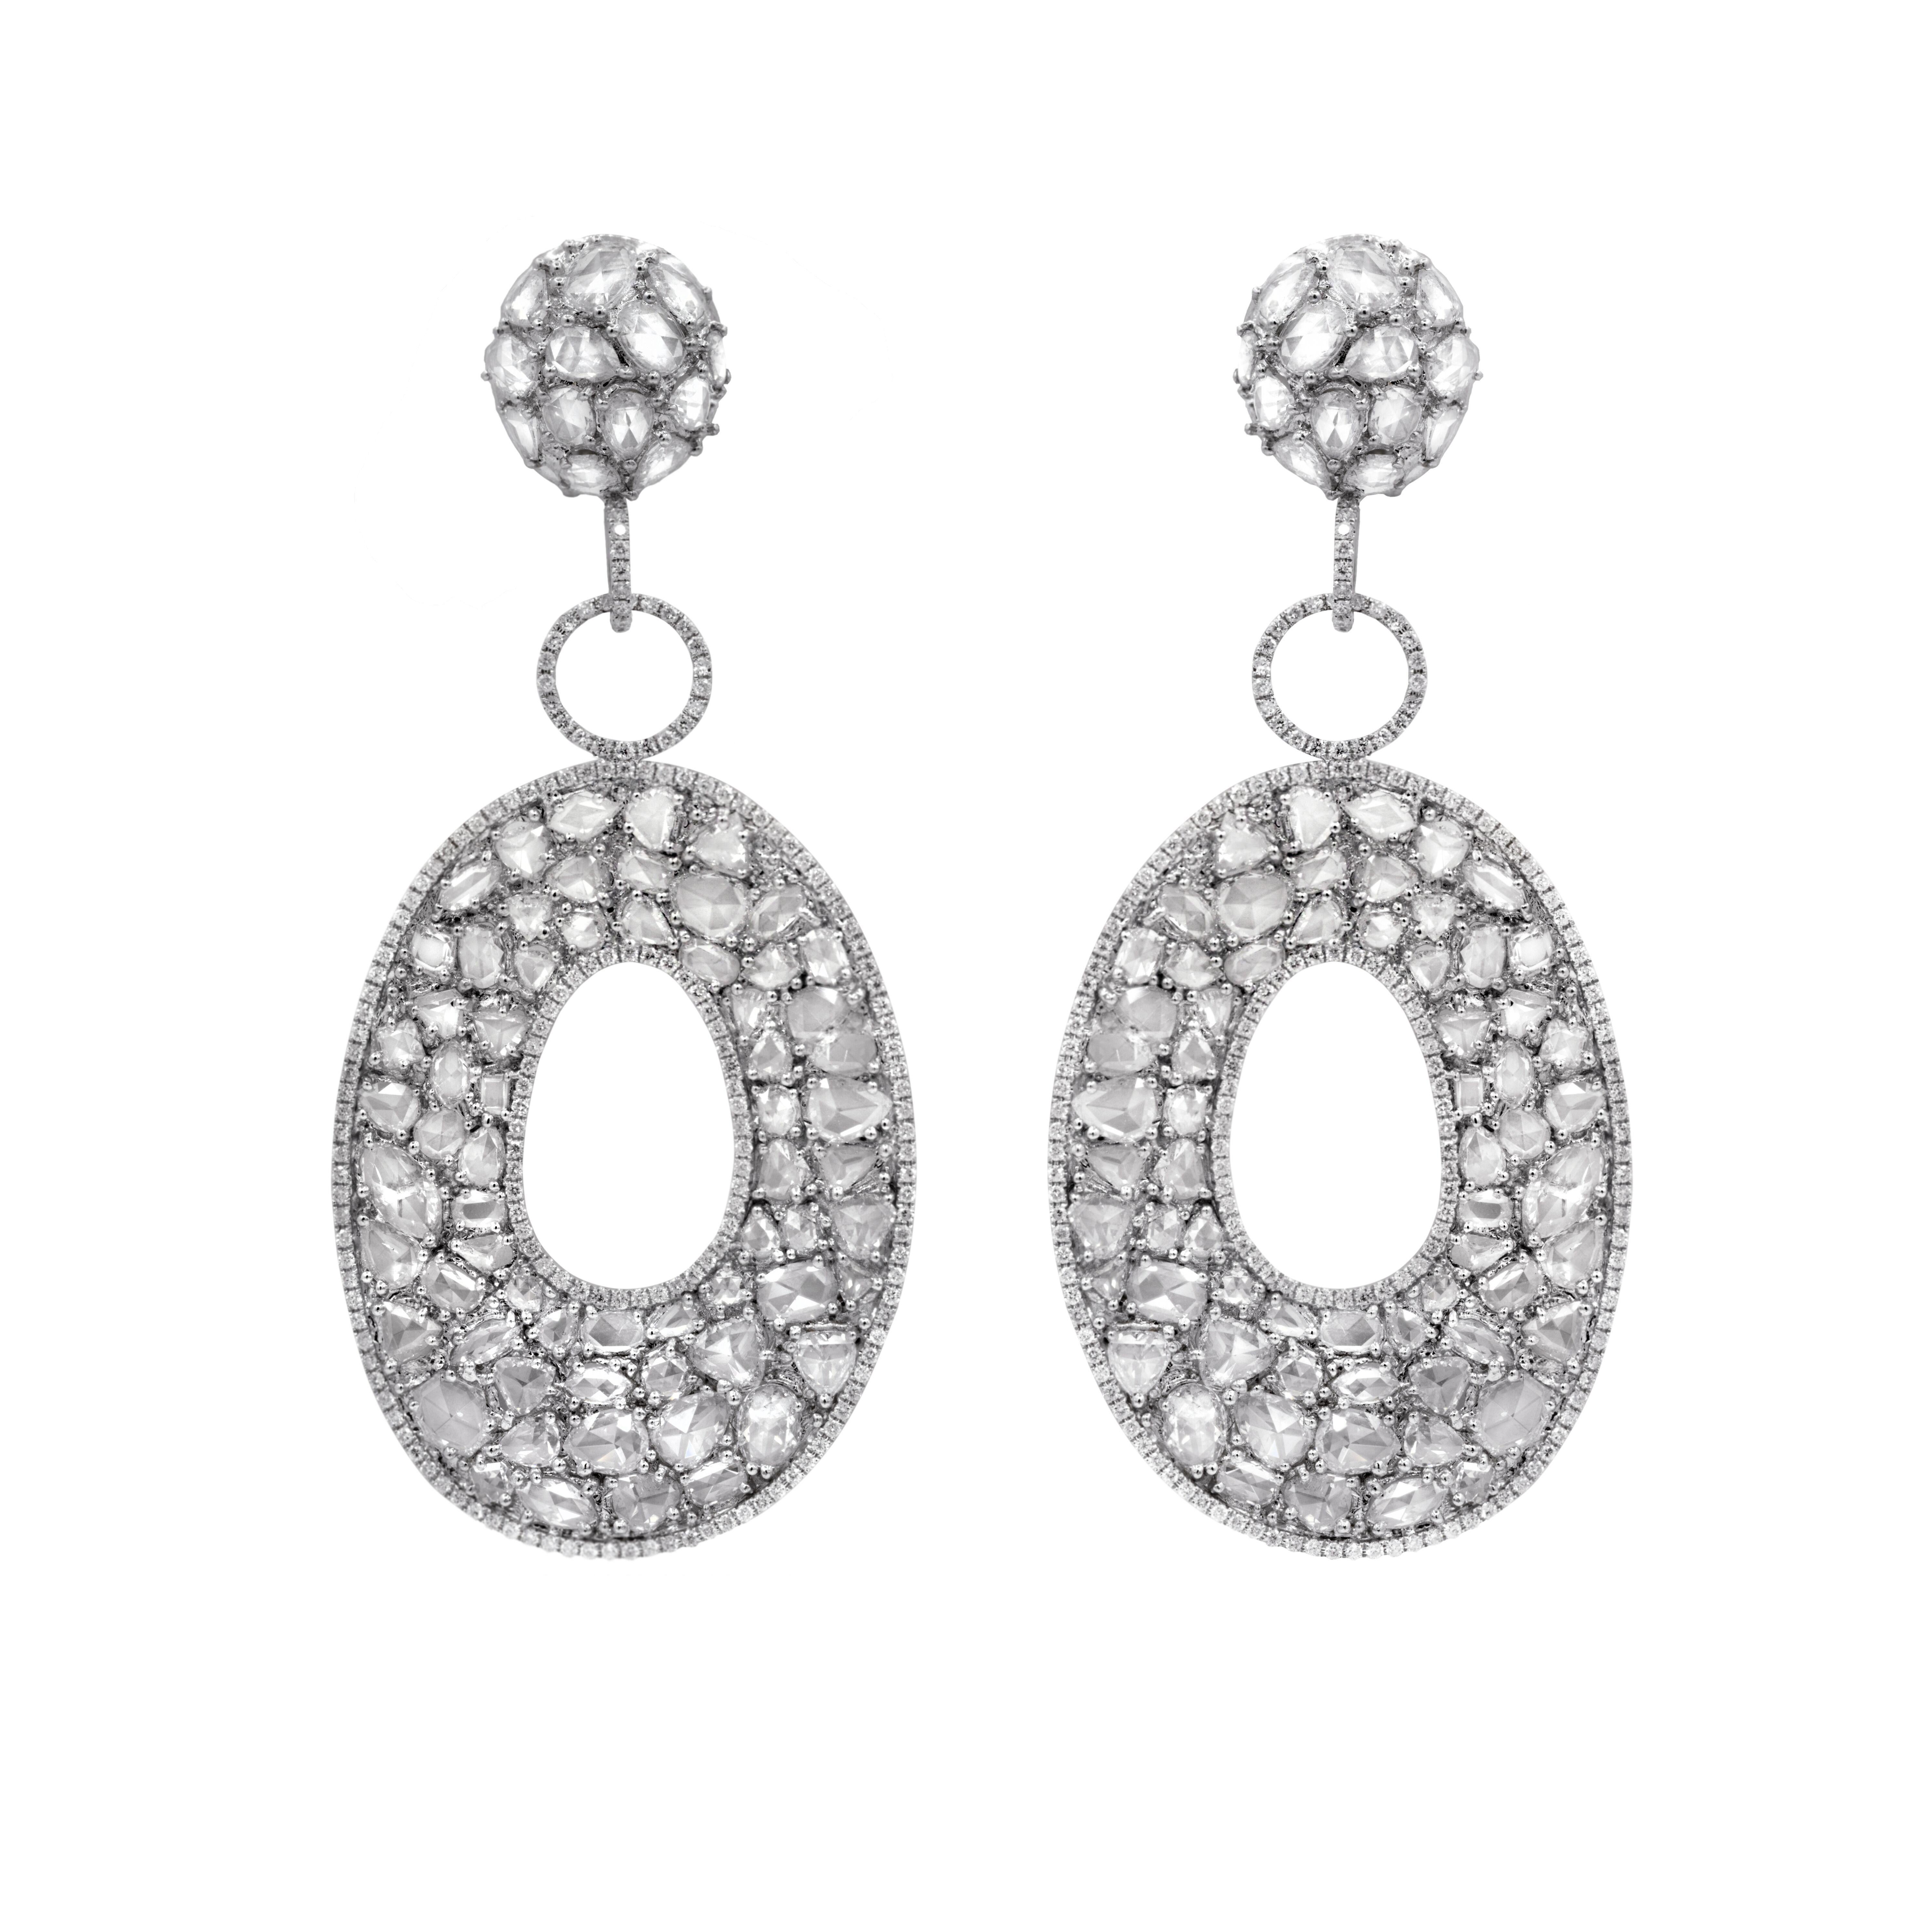 18 kt white gold diamond hanging bagel earrings adorned with 26.43 cts tw of rose cut diamonds.
Diana M. is a leading supplier of top-quality fine jewelry for over 35 years.
Diana M is one-stop shop for all your jewelry shopping, carrying line of